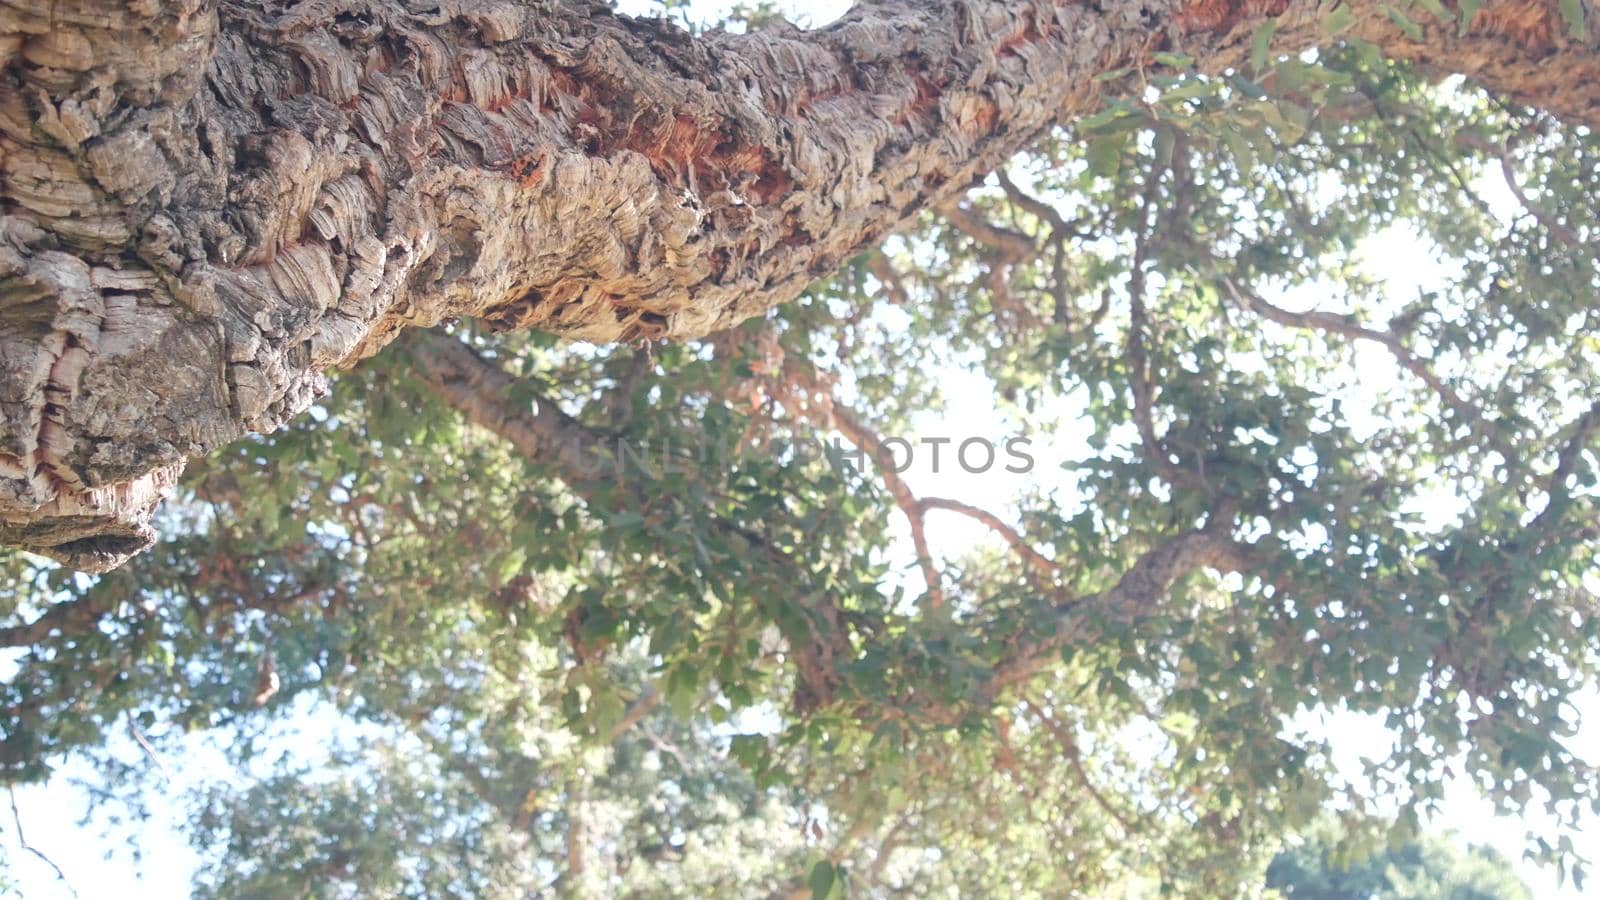 Big cork tree or large corkwood trunk, branches and canopy foliage from below, leafage low angle view. Overgrown forest or woodland, under lush greenery of huge giant plant. Green leaves in sun light.